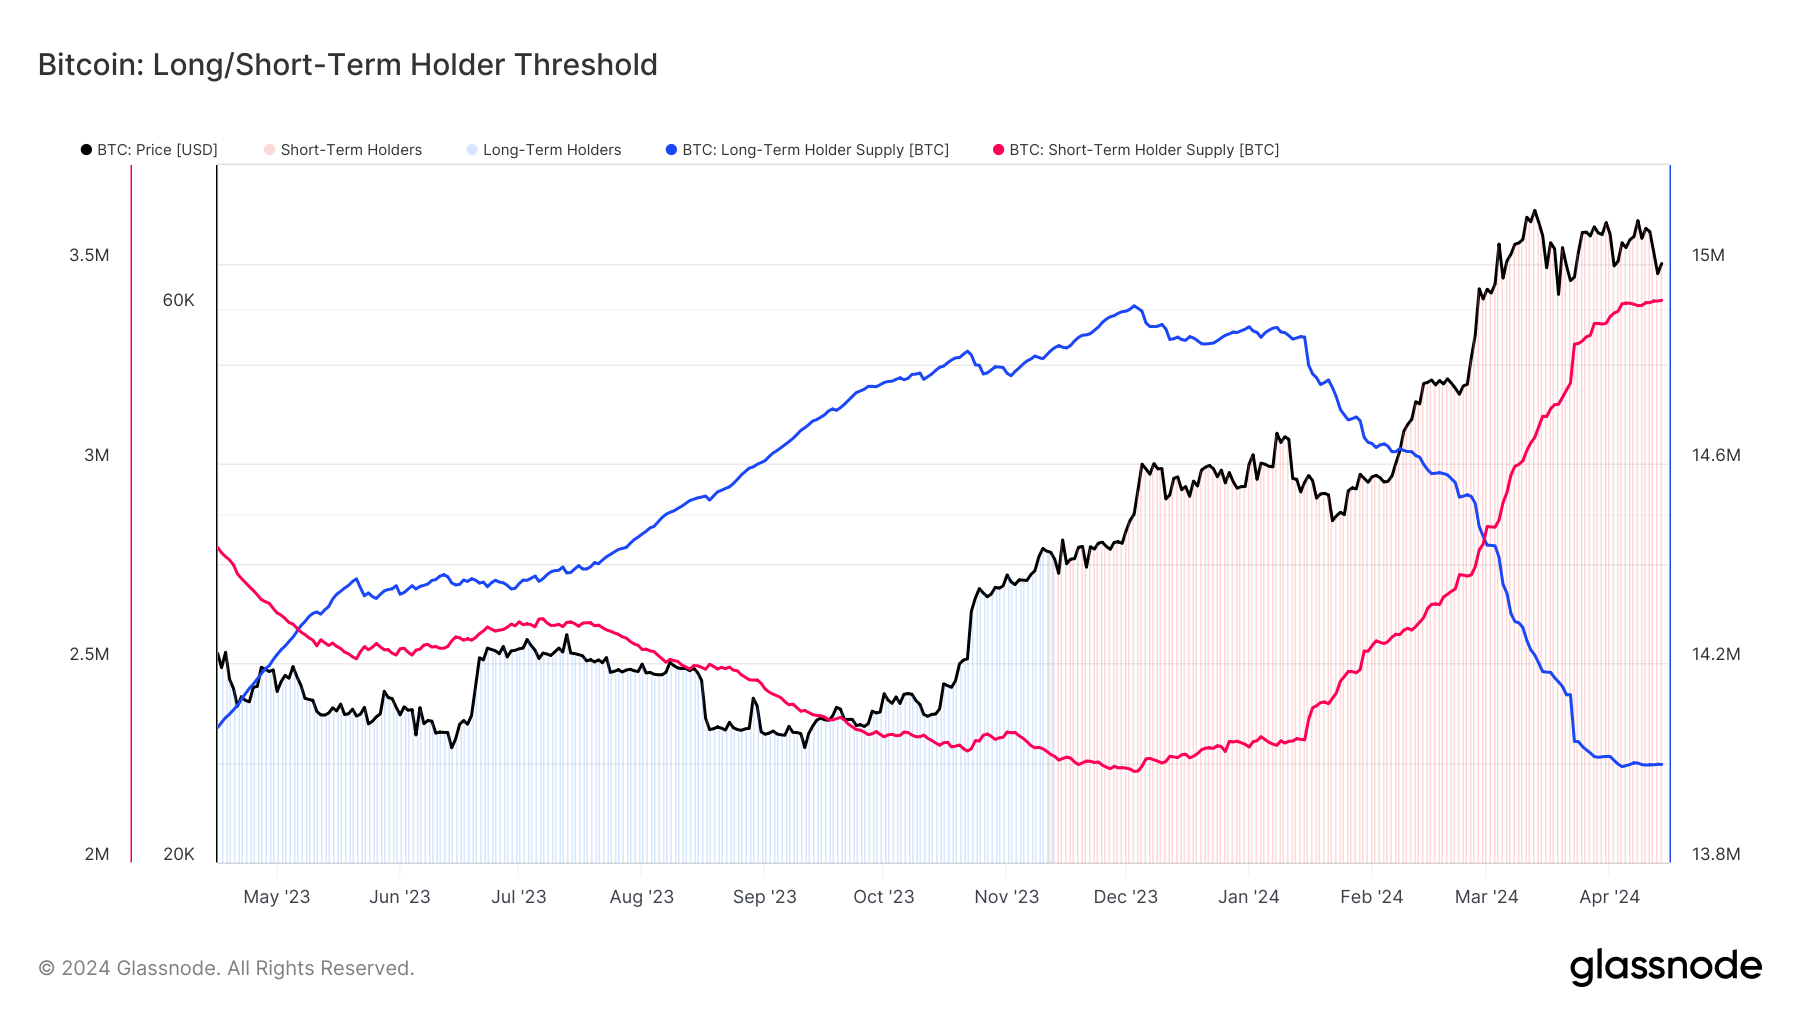 Bitcoin’s long-term holders shift to accumulation